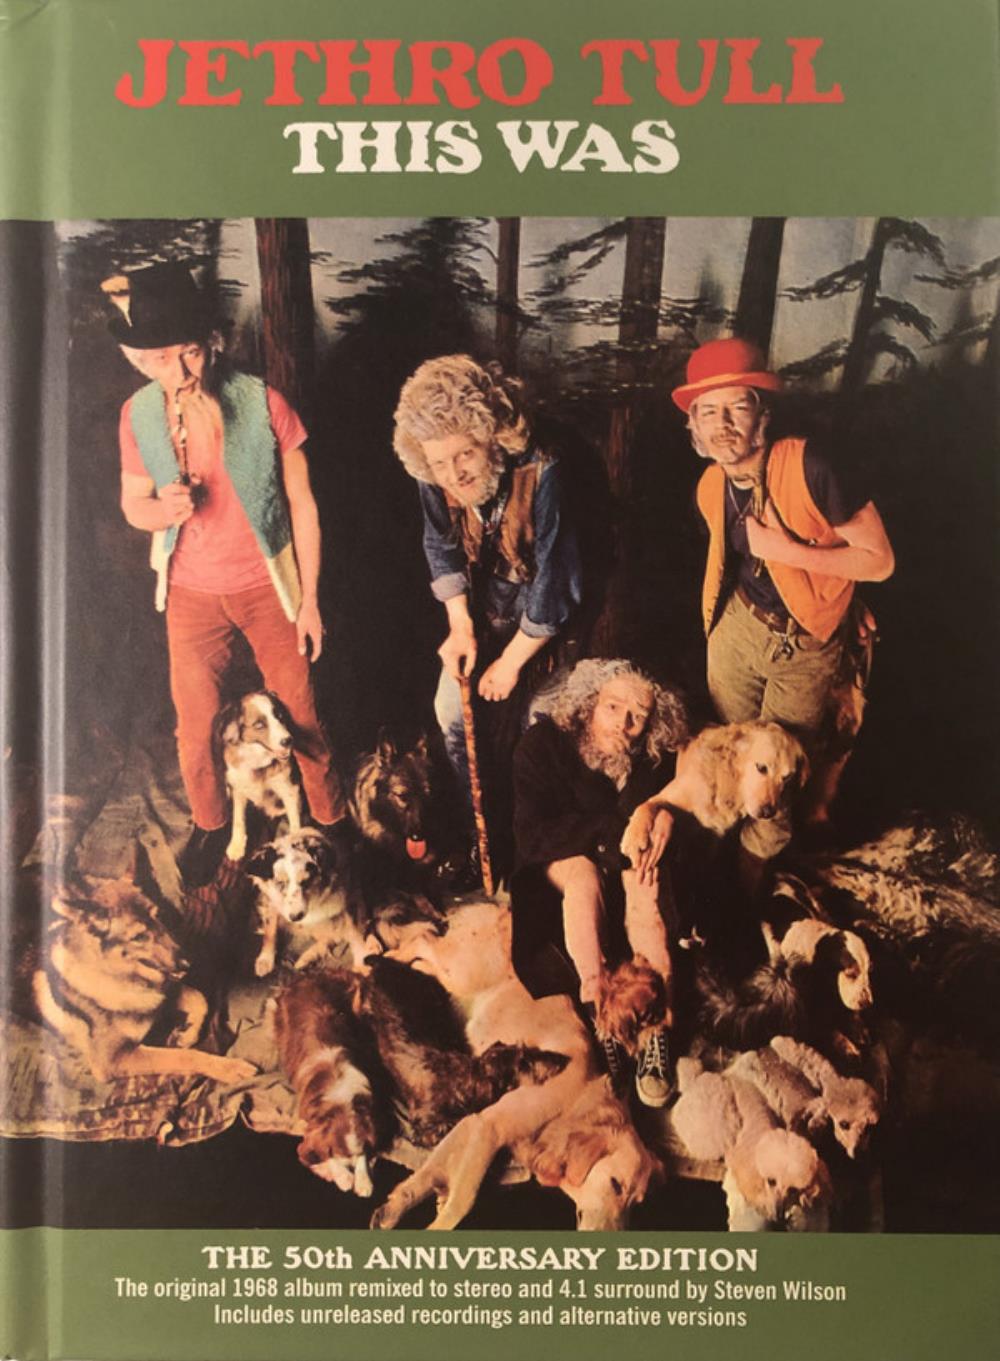 Jethro Tull This Was (50 Anniversary Edition) album cover